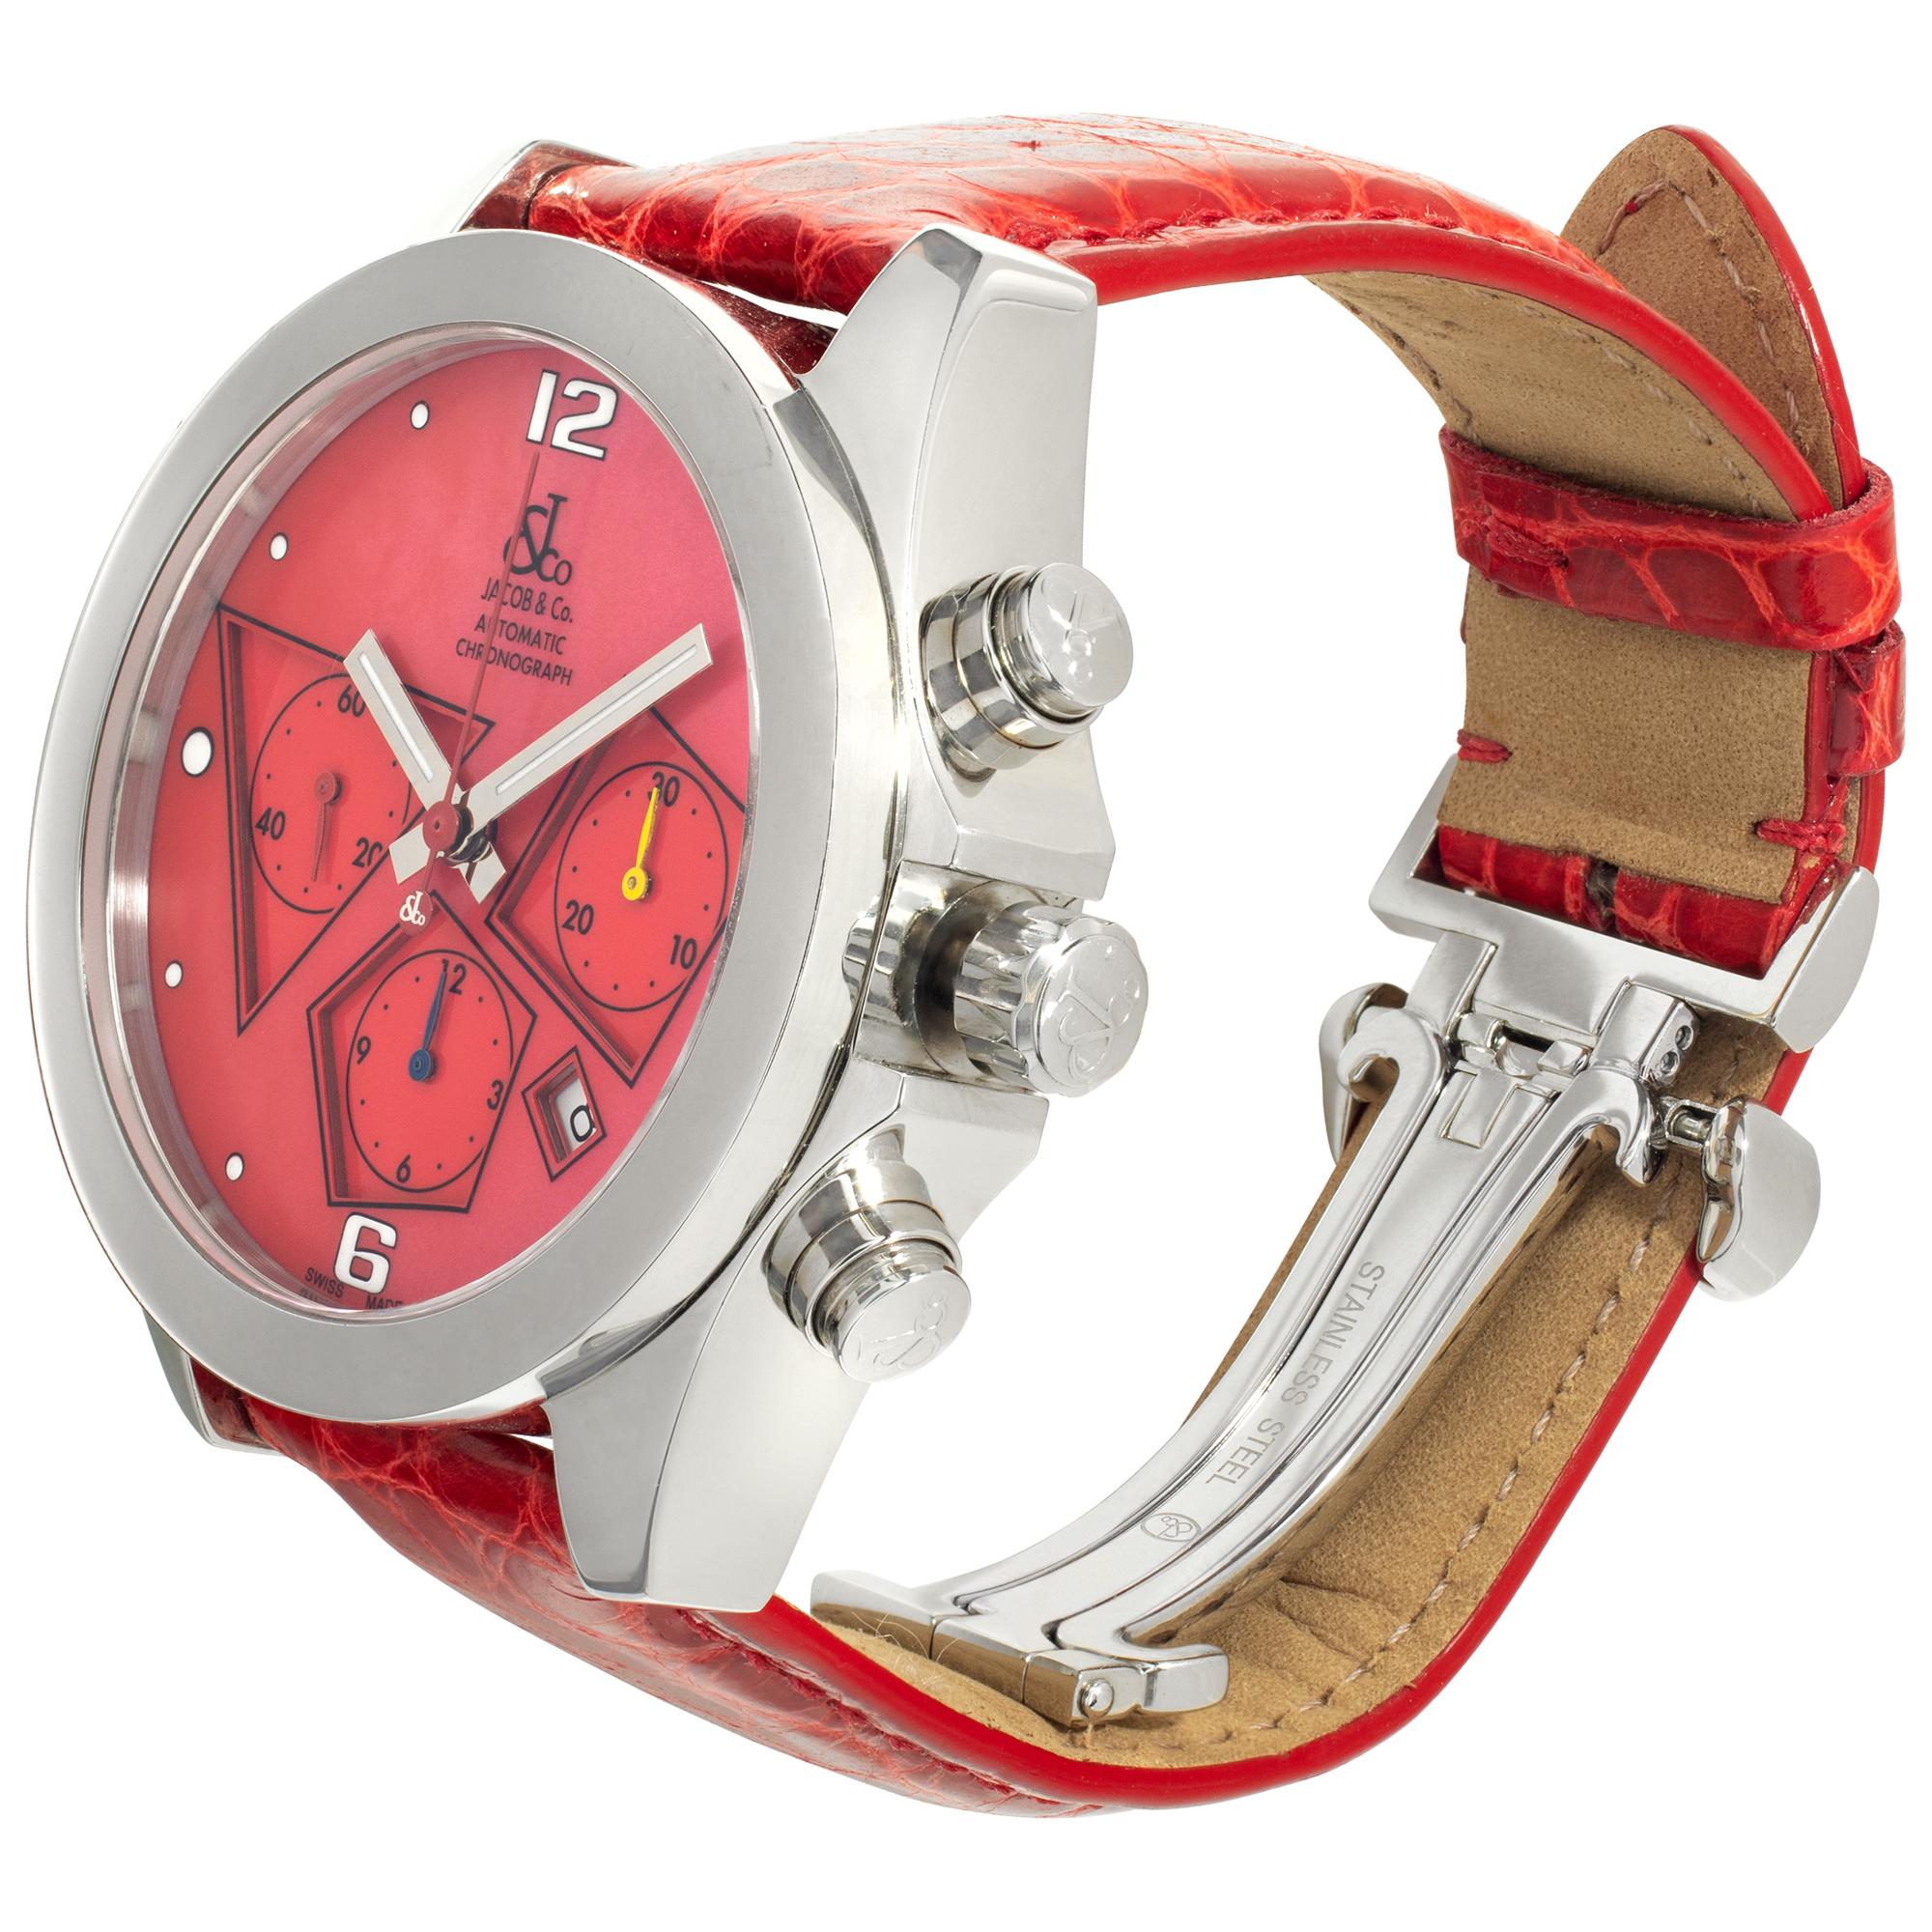 Jacob & Co Chronograph ACM-7 in stainless steel with red mother of pearl dial on red alligator strap with J&Co. steel deployant buckle. Auto w/chronograph & date. 40 mm case size. With box. Ref ACM-7. Fine Pre-owned Jacob & Co. Watch.

 Certified